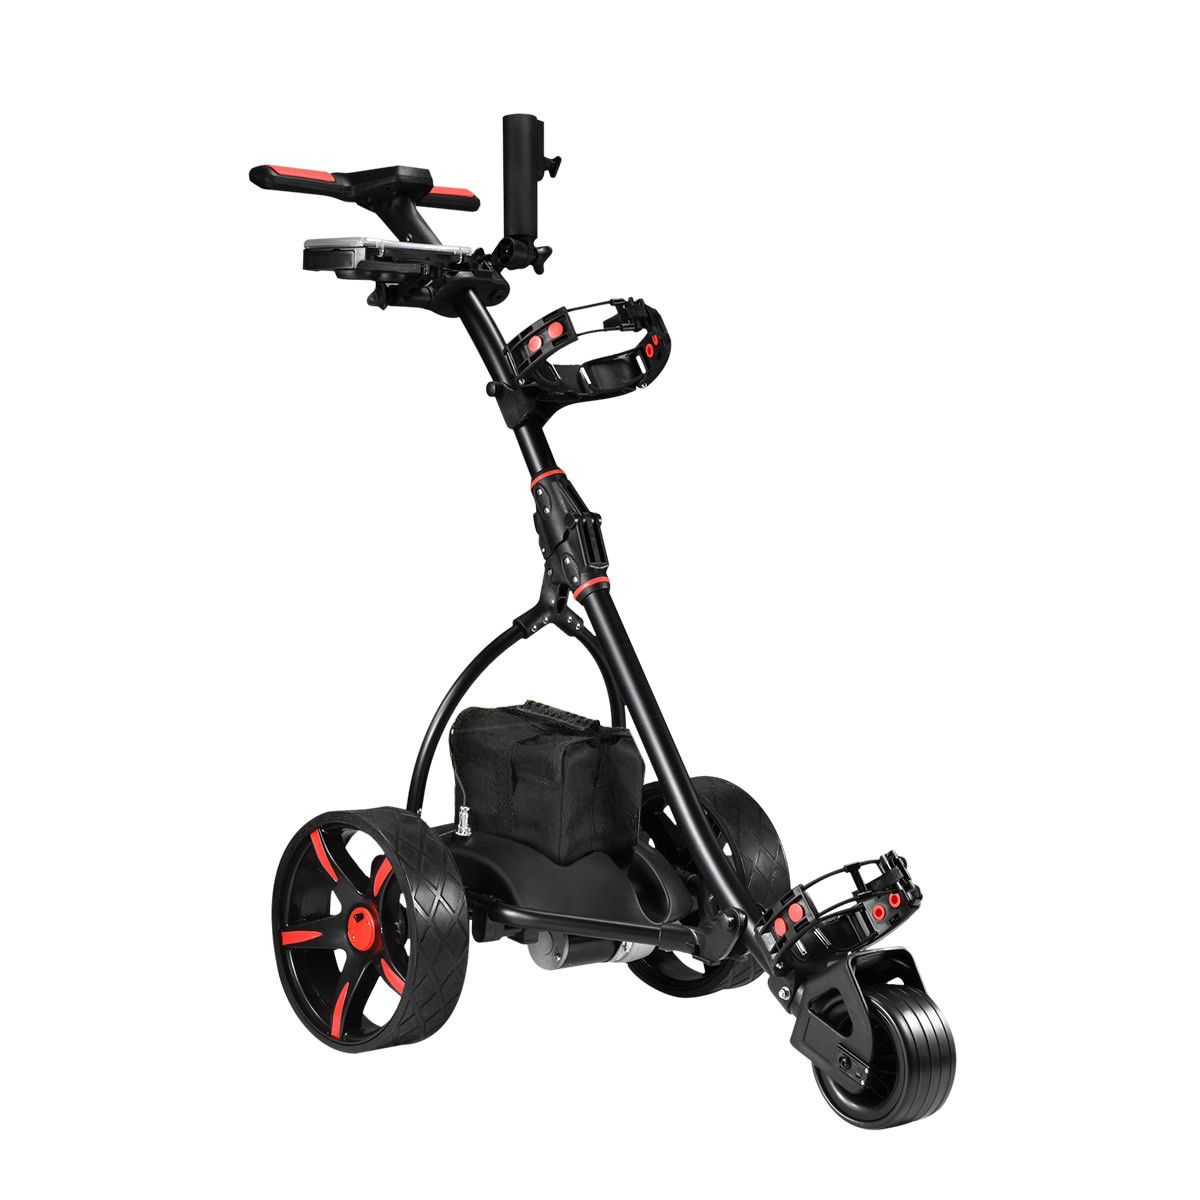 Electric Golf Trolley 3 Wheel Foldable Push Golf Buggy Cart 3 Distance Control LED Display- Black & Red